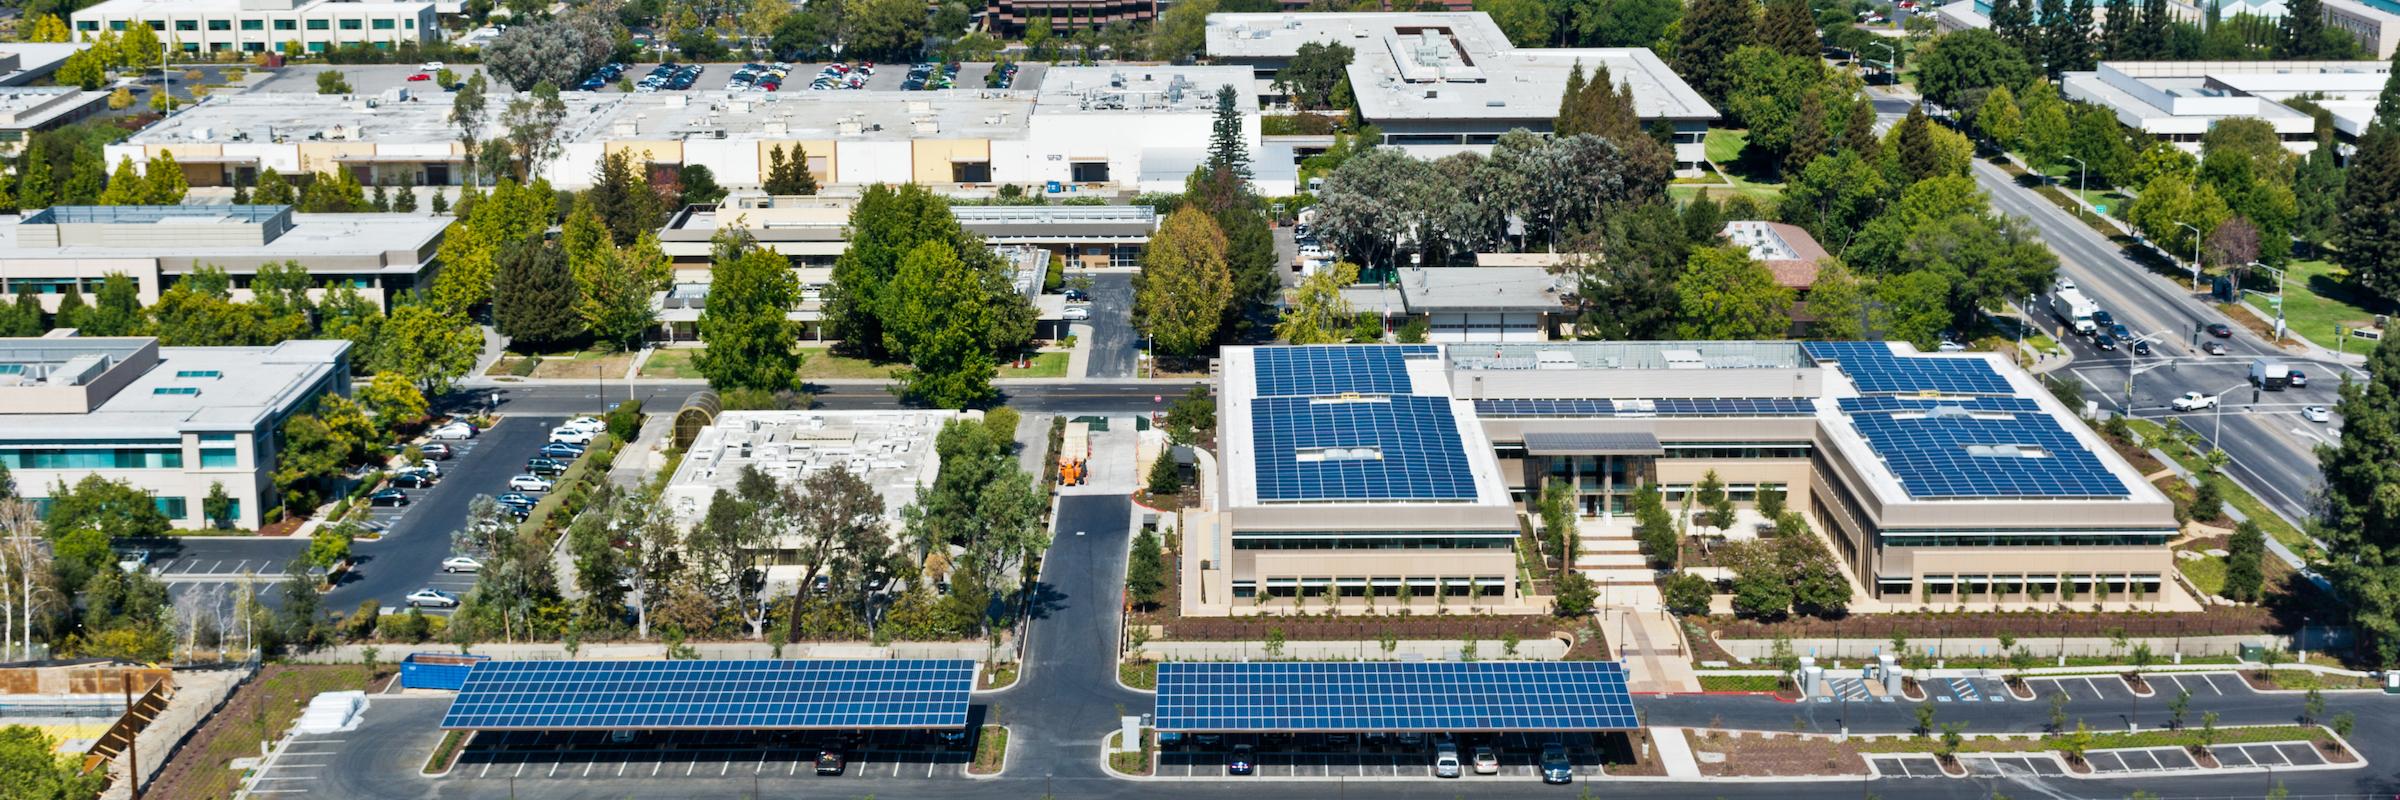 Page Mill Office park with roof and ground mount solar